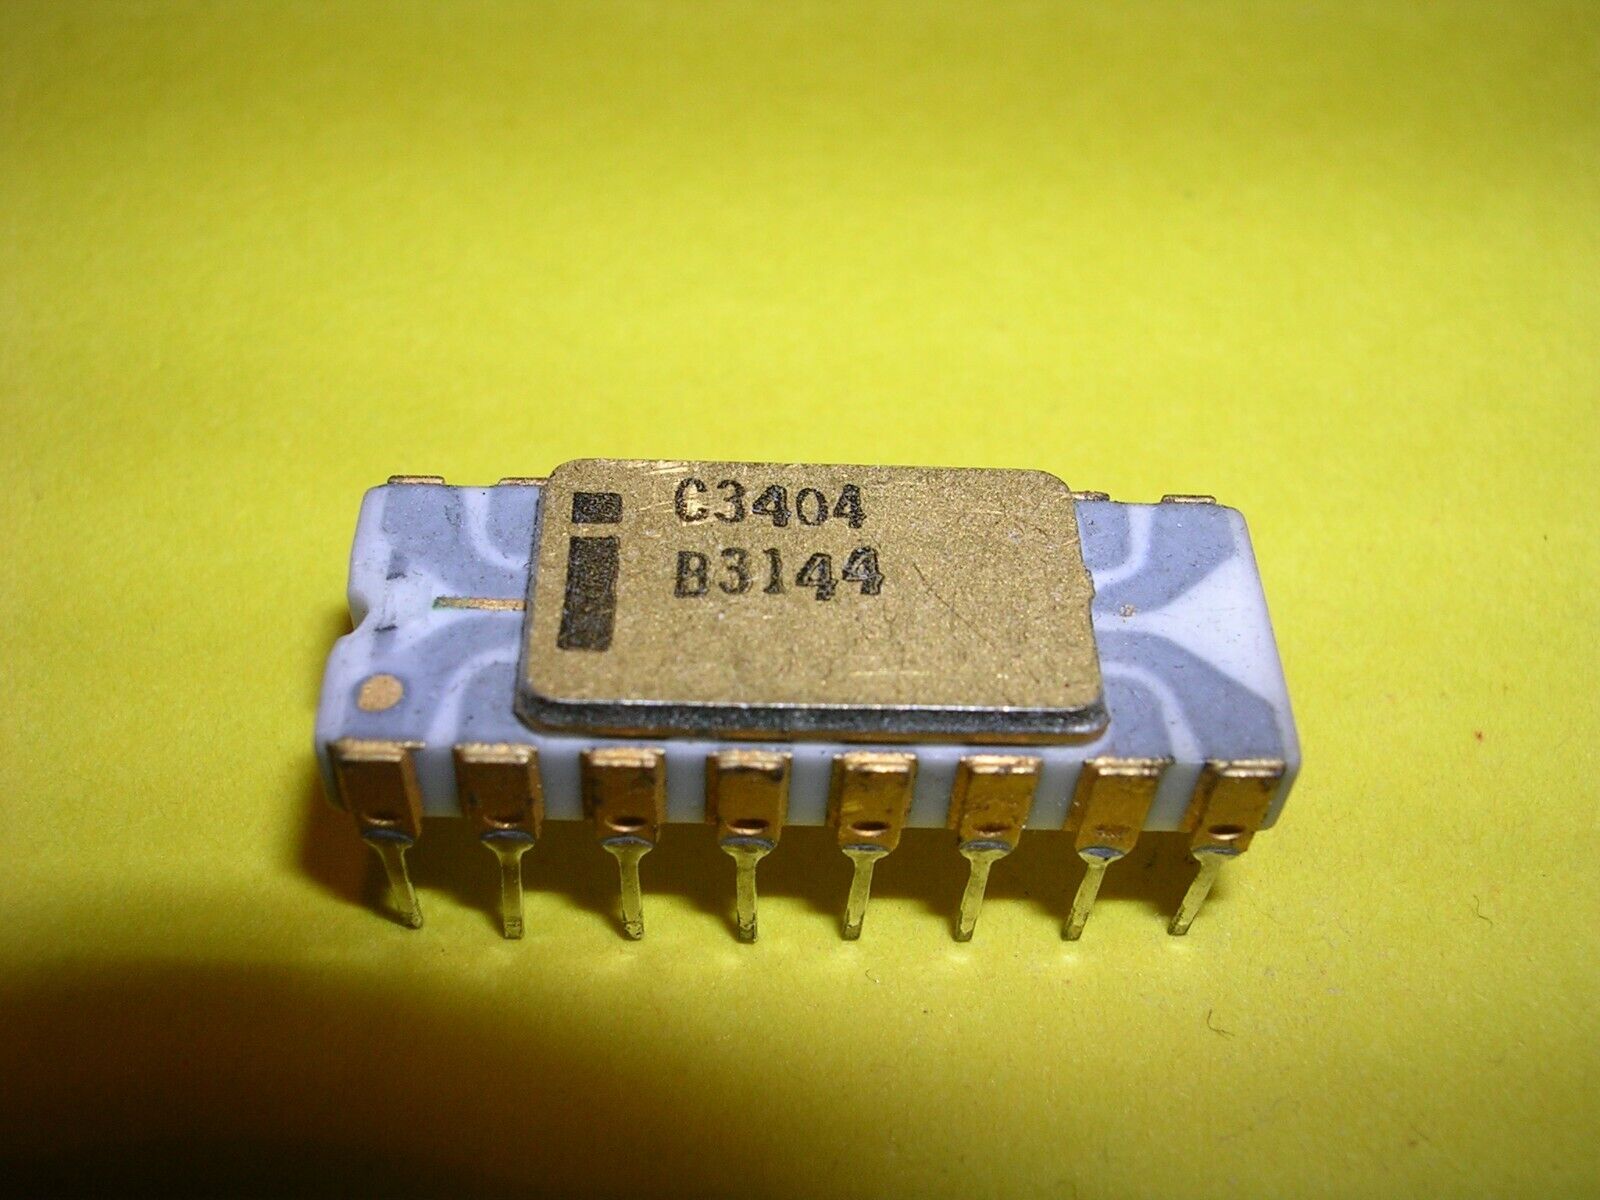 Intel C3404 (3404) - Extremely Rare - Only a Couple Known to Exist